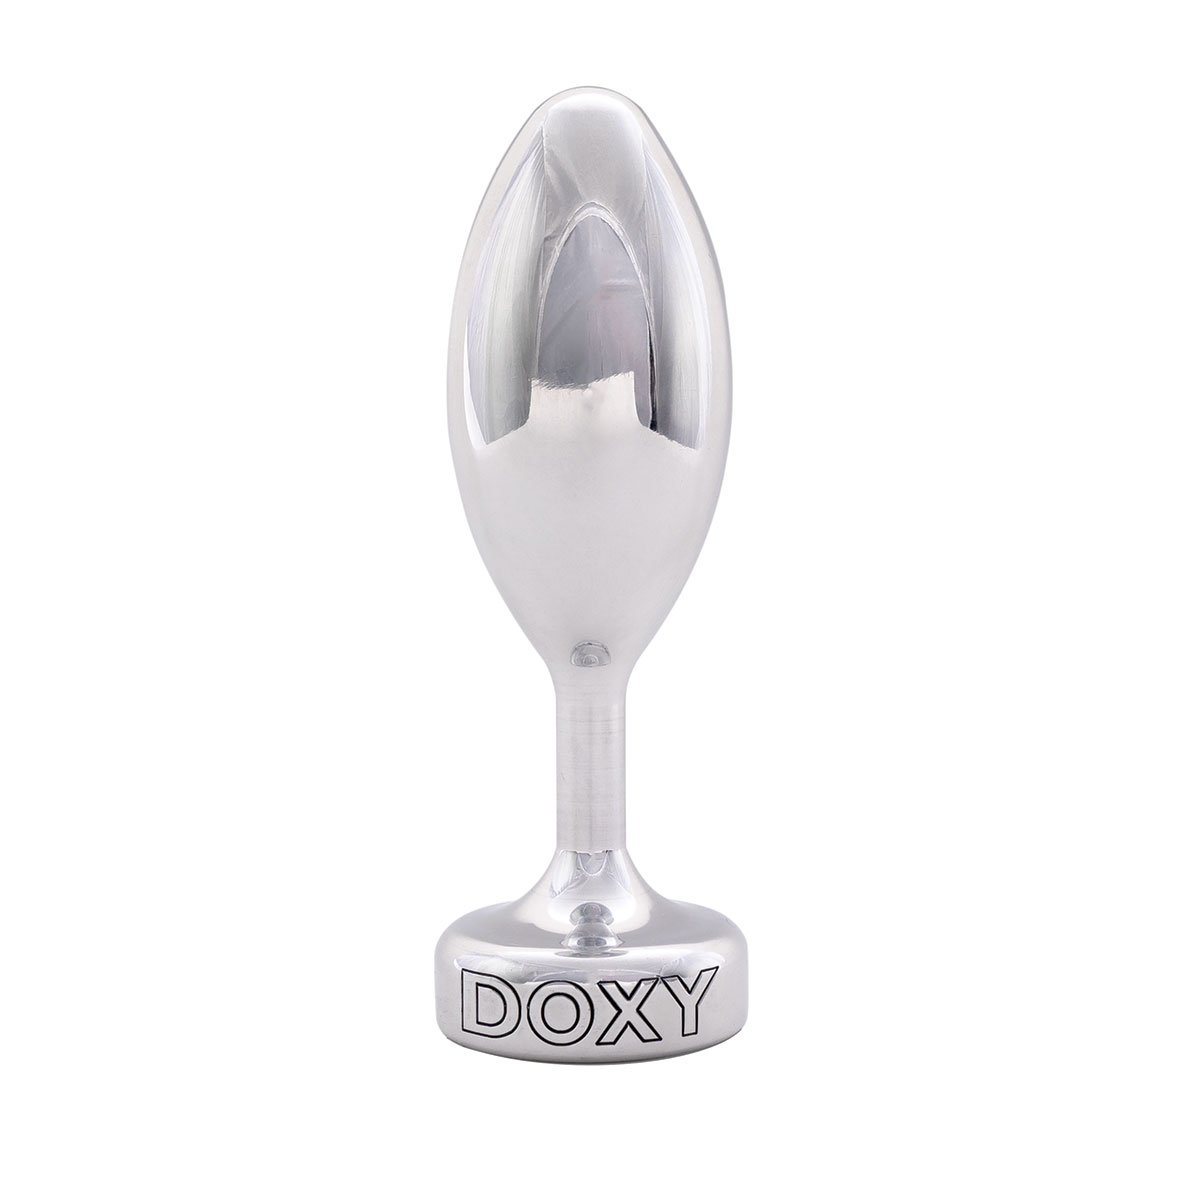 Doxy Smooth Plug - Buy At Luxury Toy X - Free 3-Day Shipping